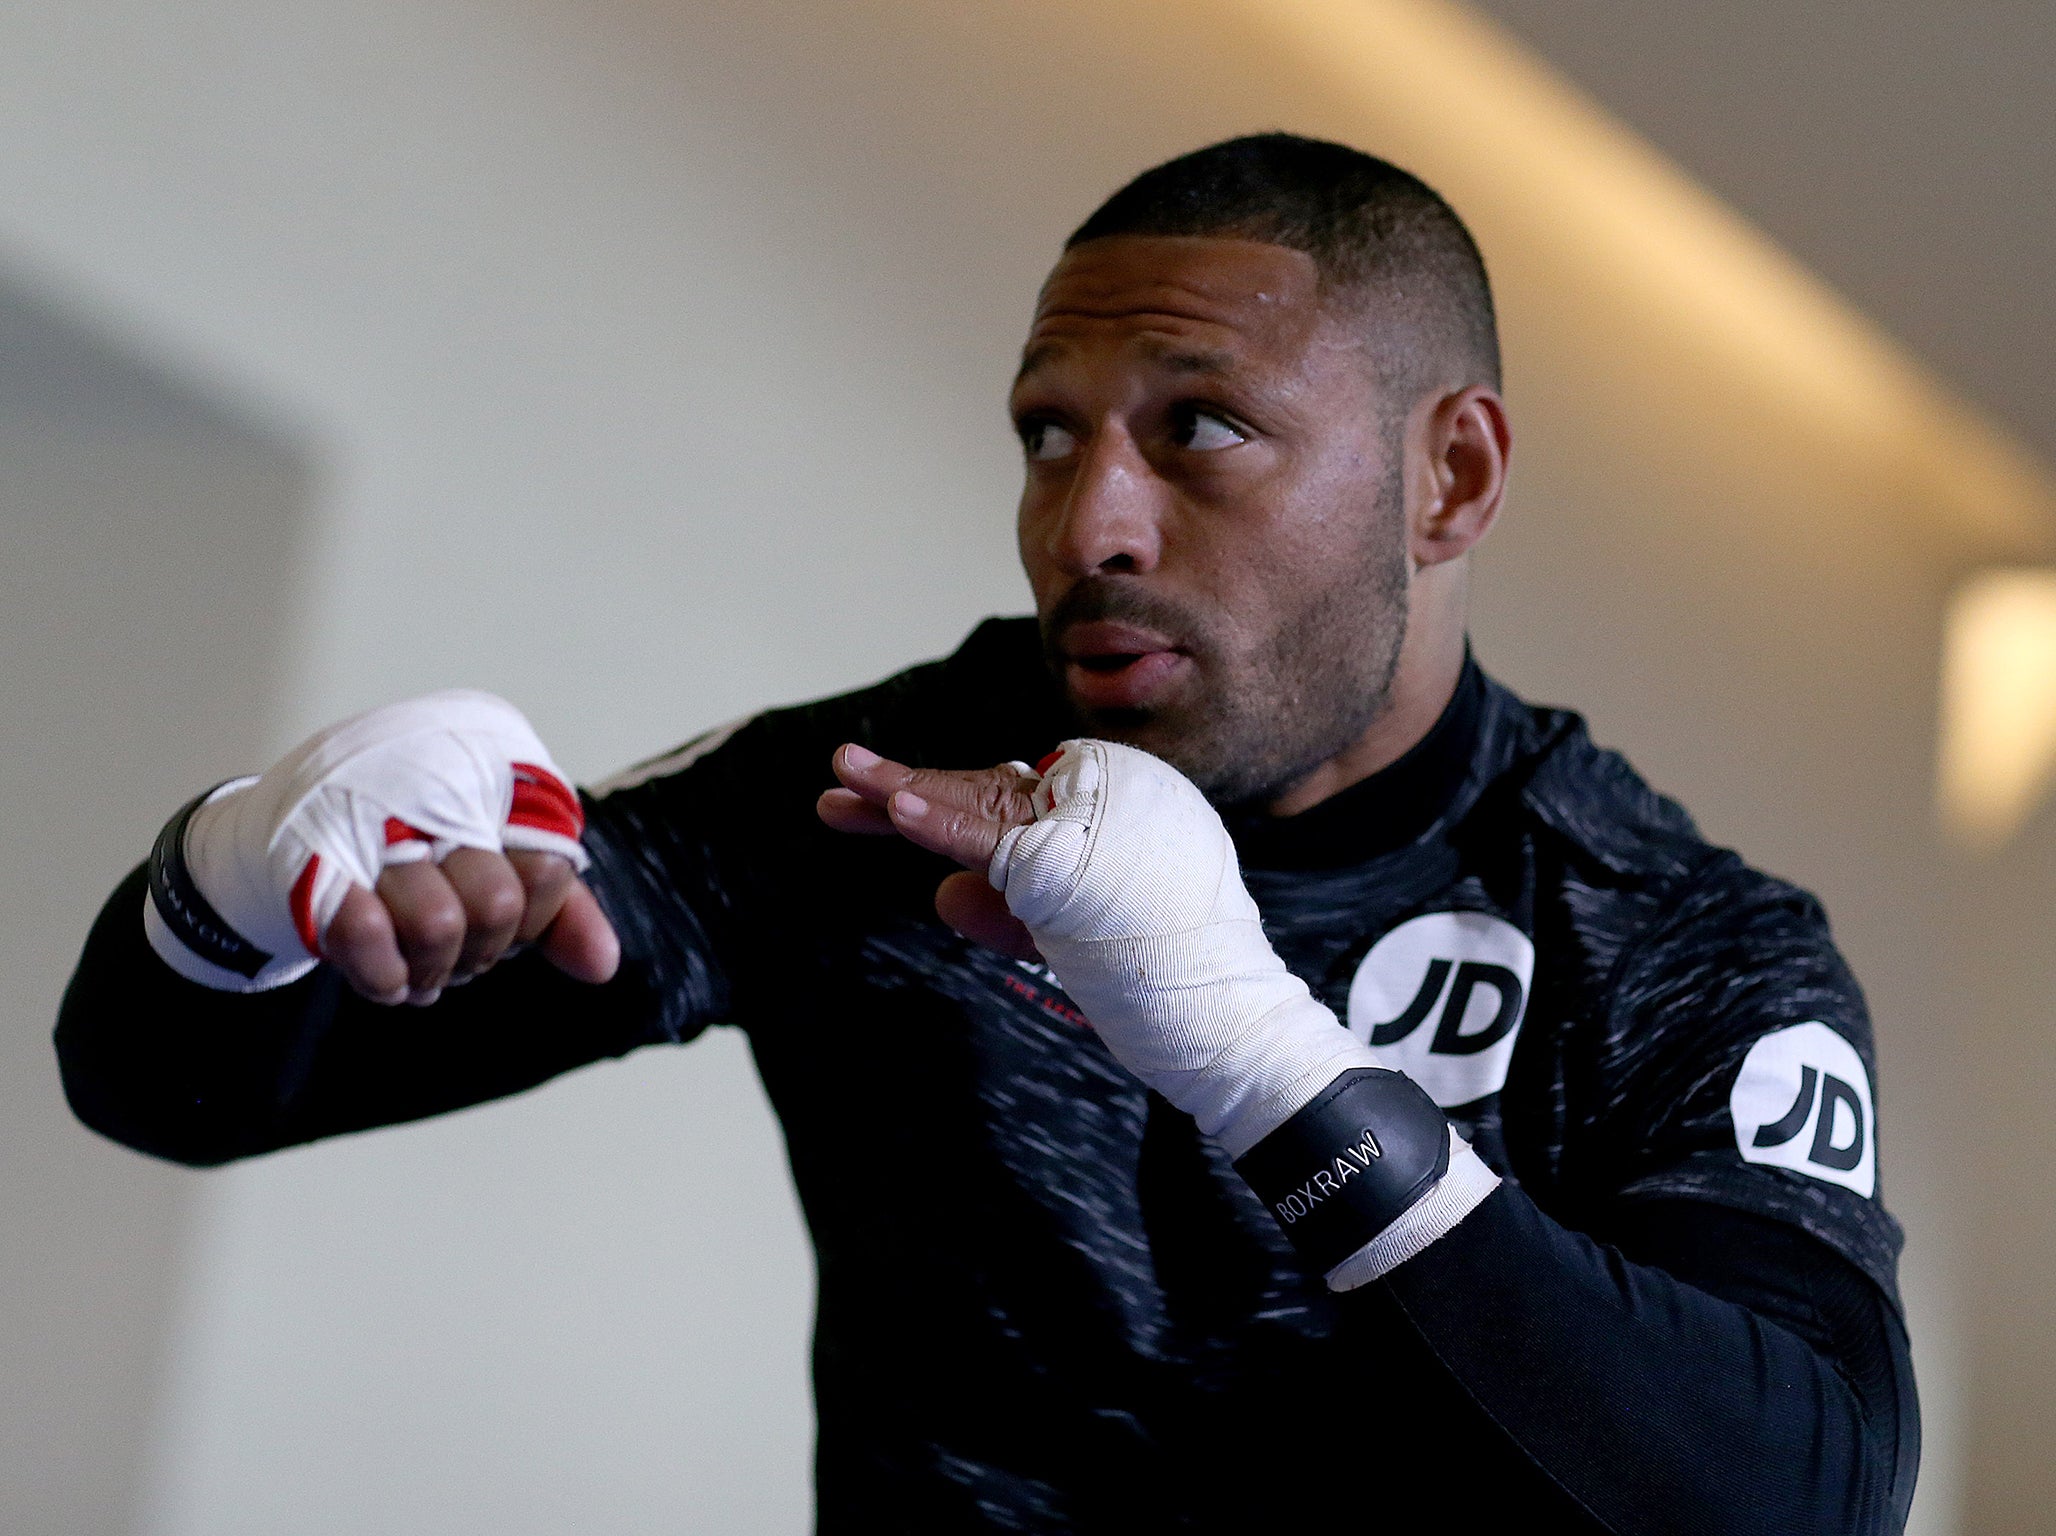 Kell Brook makes his super-welterweight debut this evening